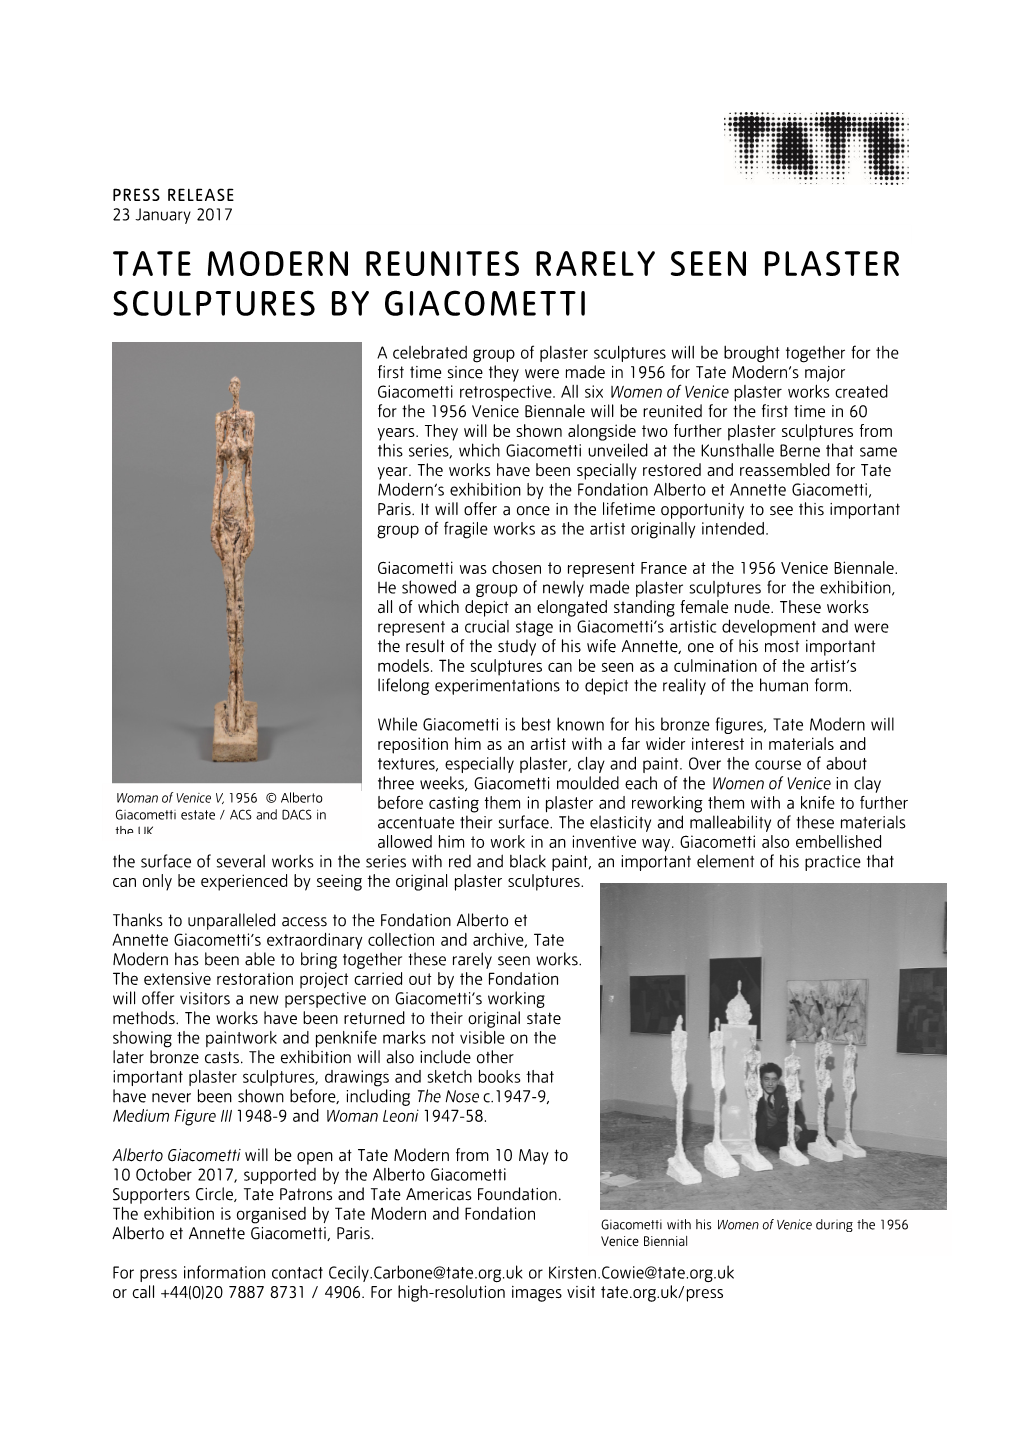 Tate Modern Reunites Rarely Seen Plaster Sculptures by Giacometti